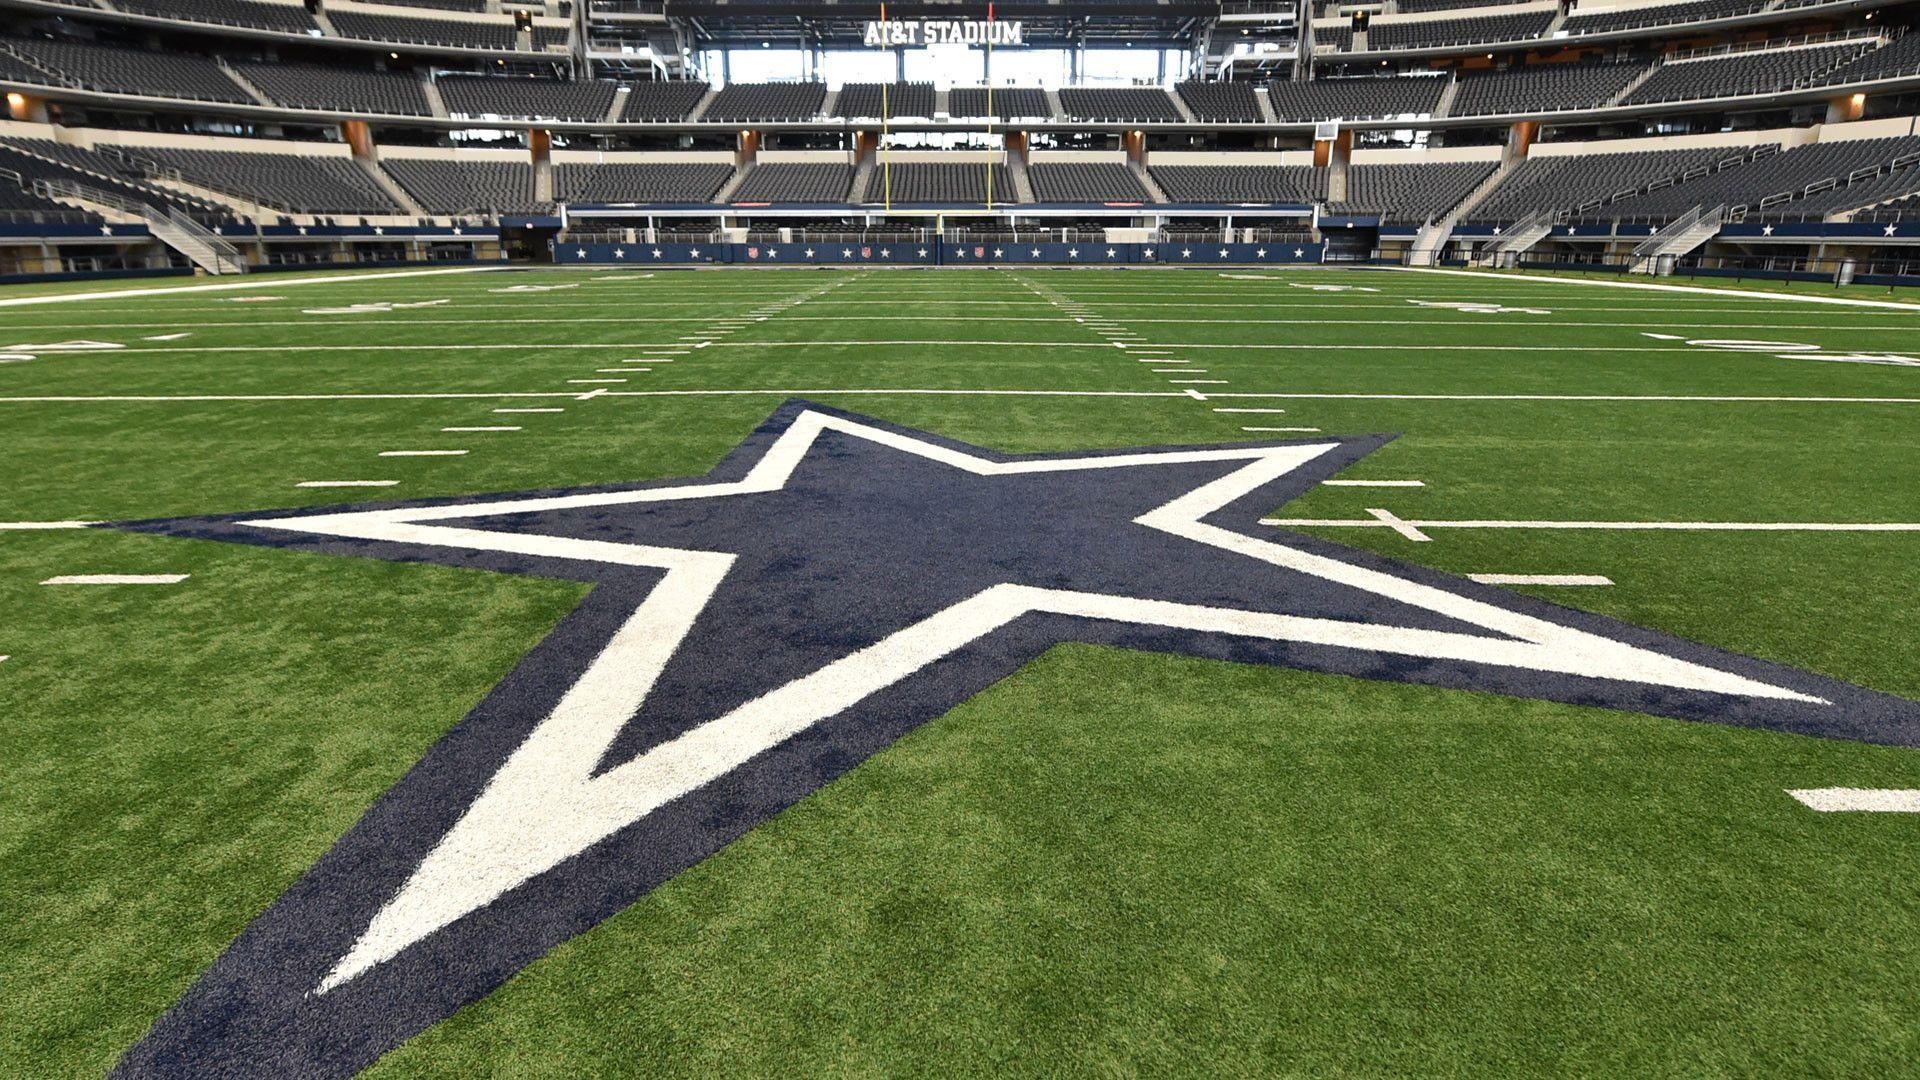 Dallas Cowboys: The team made the first Super Bowl appearance in franchise history in 1970. 1920x1080 Full HD Wallpaper.